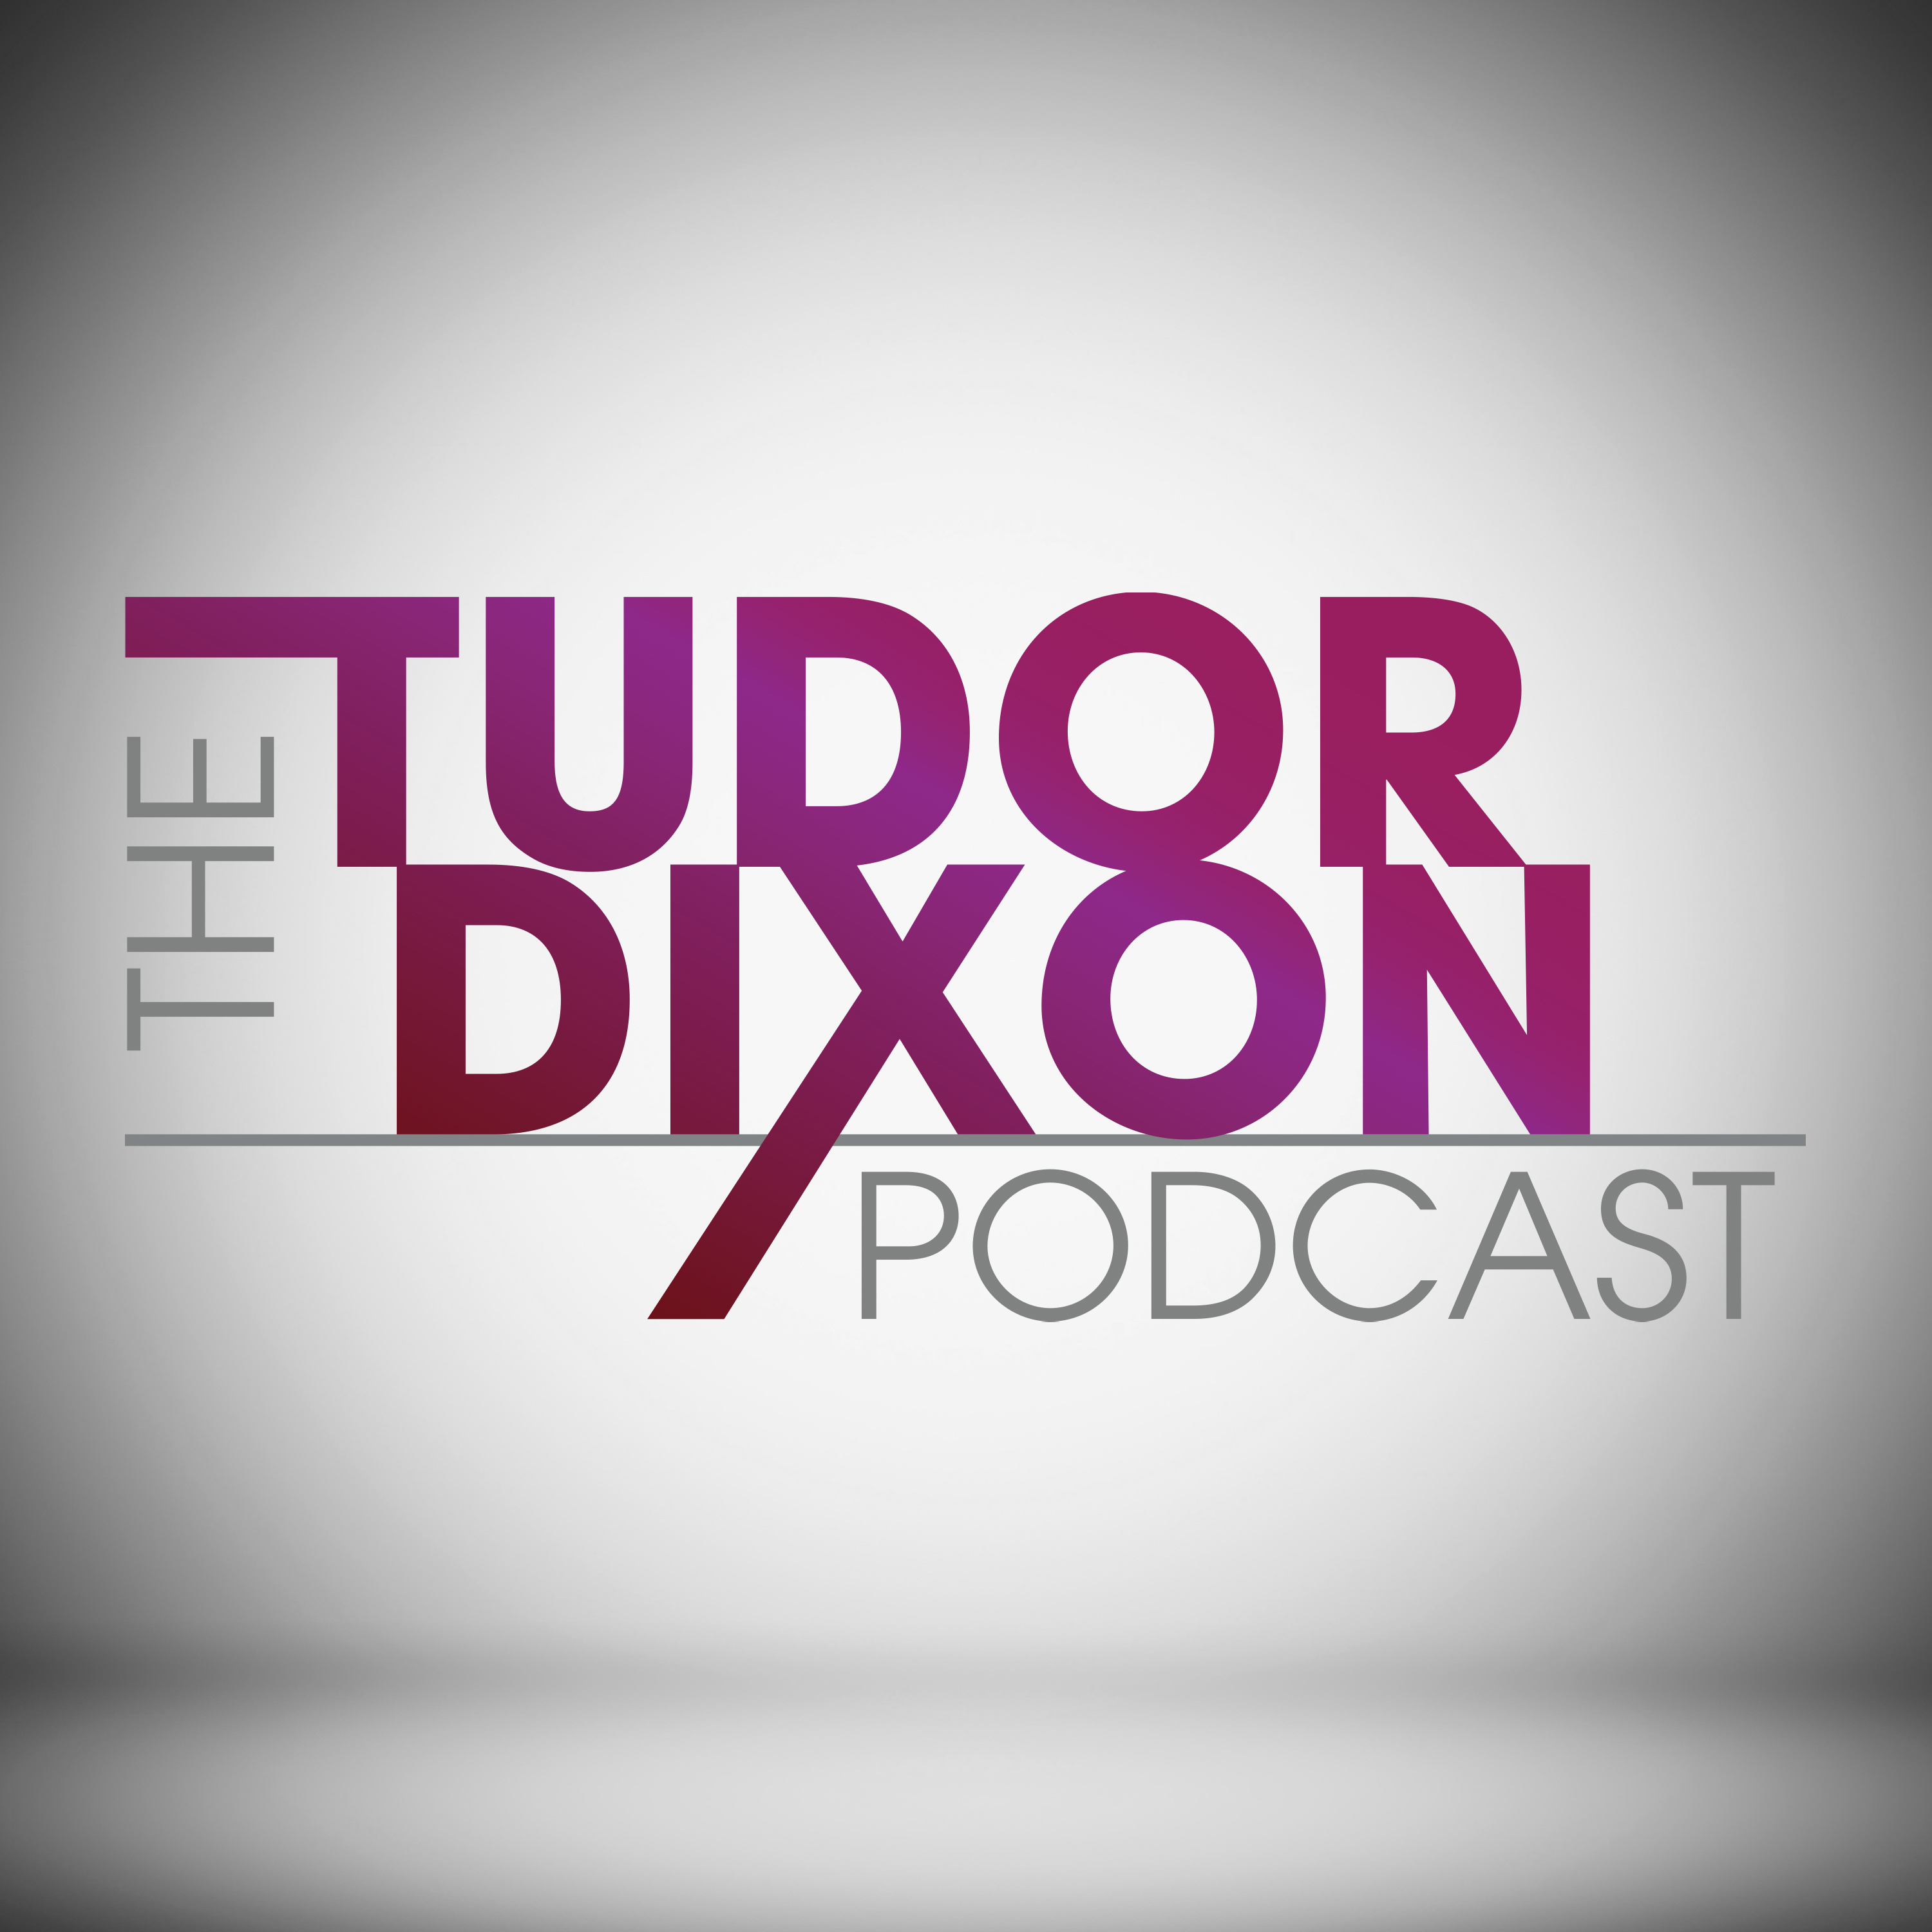 The Tudor Dixon Podcast: Are Skincare Products Hurting Your Children with Dr. Jody Levine